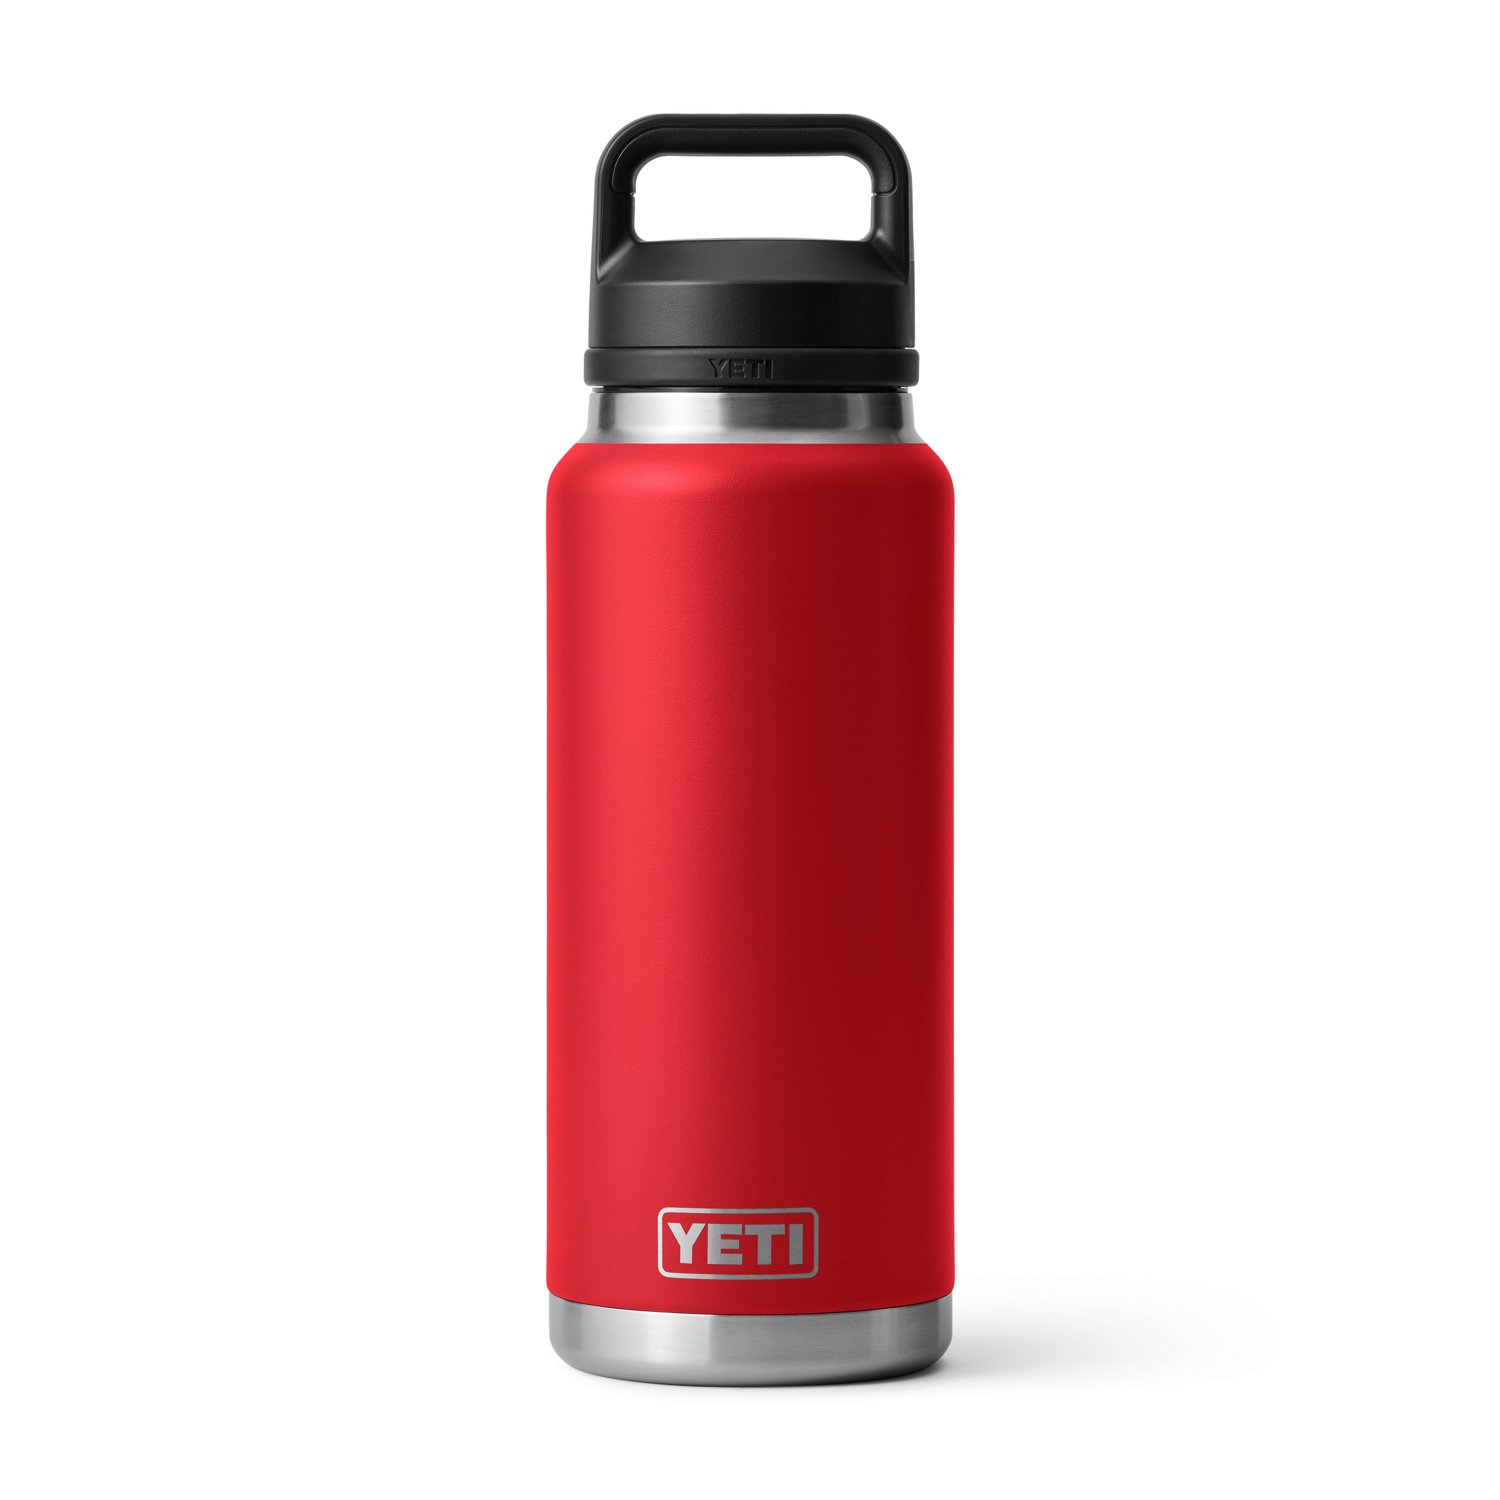 https://academy.scene7.com/is/image/academy//drinkware/yeti-rambler-36-oz-bottle-with-chug-cap-21071501396-red/3204ac25a66749d4a264a25172dee45d